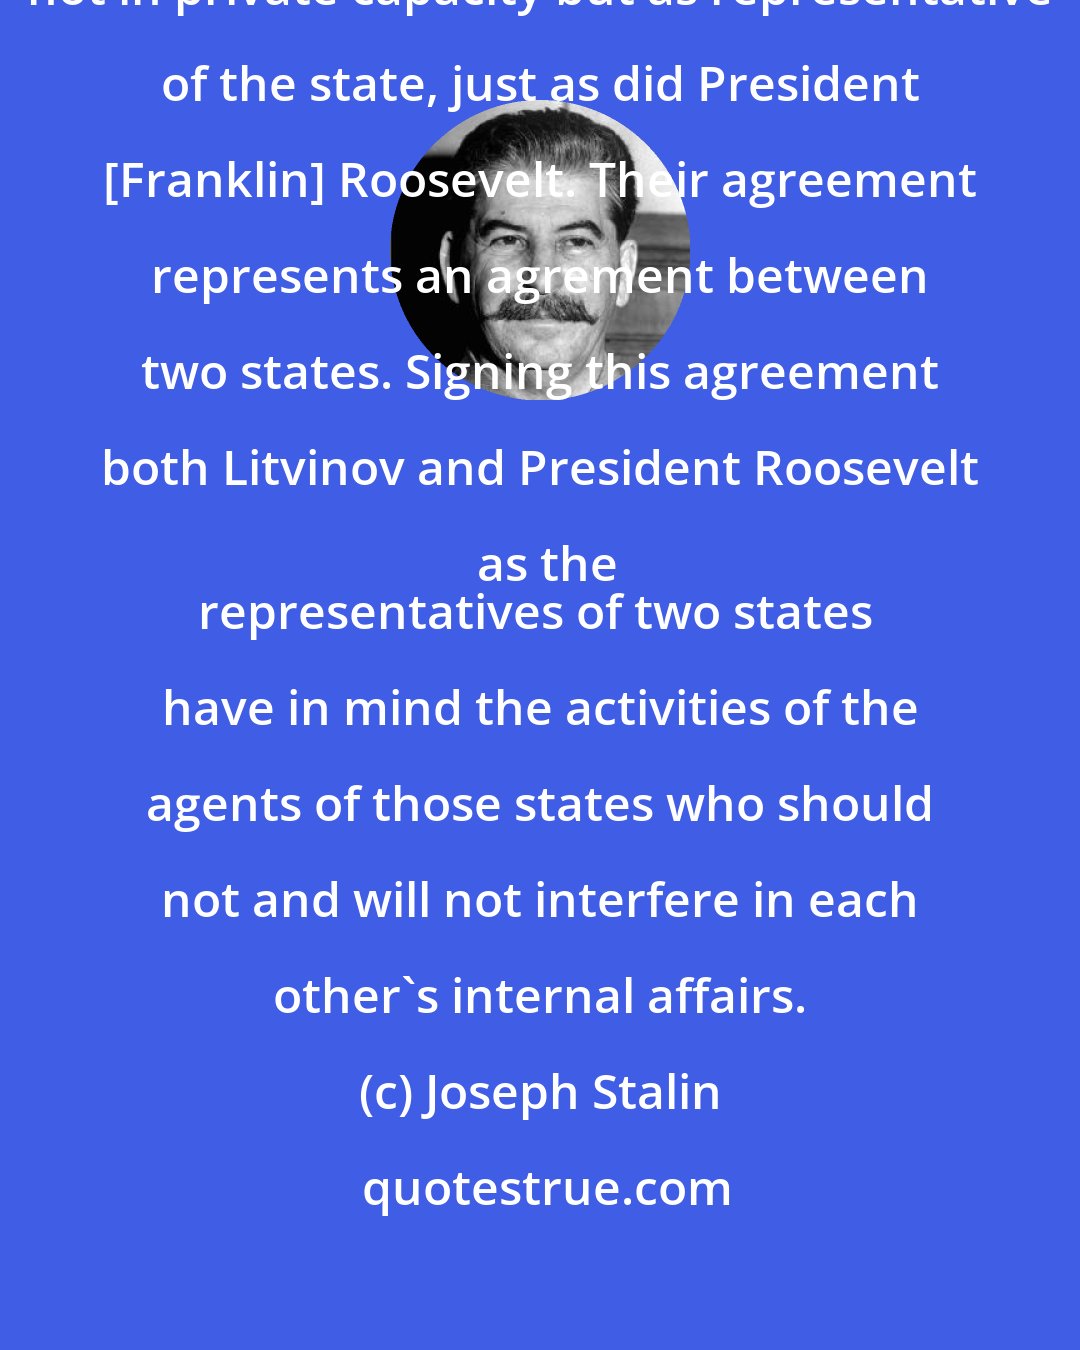 Joseph Stalin: [Maxim] Litvinov signed his letter not in private capacity but as representative of the state, just as did President [Franklin] Roosevelt. Their agreement represents an agrement between two states. Signing this agreement both Litvinov and President Roosevelt as the
representatives of two states have in mind the activities of the agents of those states who should not and will not interfere in each other's internal affairs.